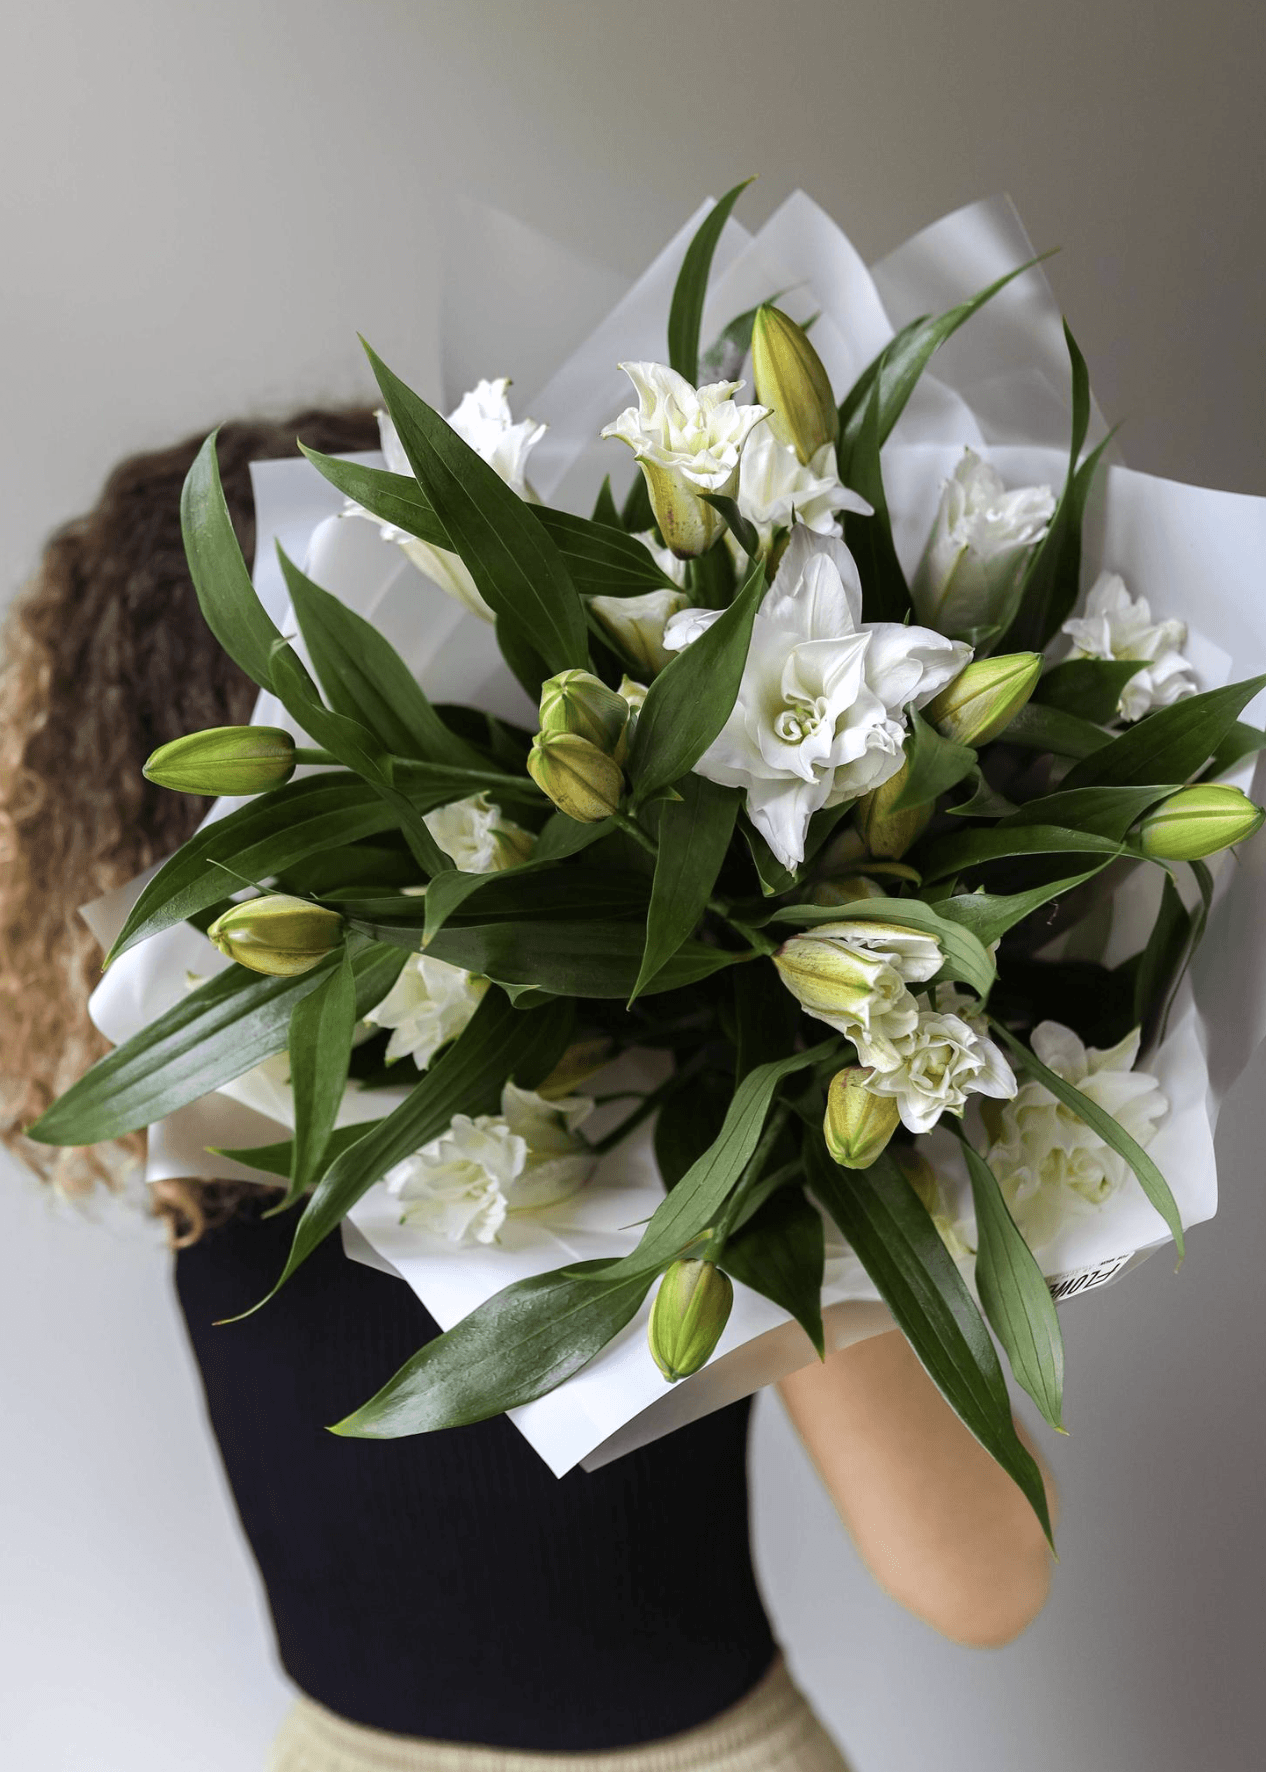 NO. 57. Bouquet of Lilies